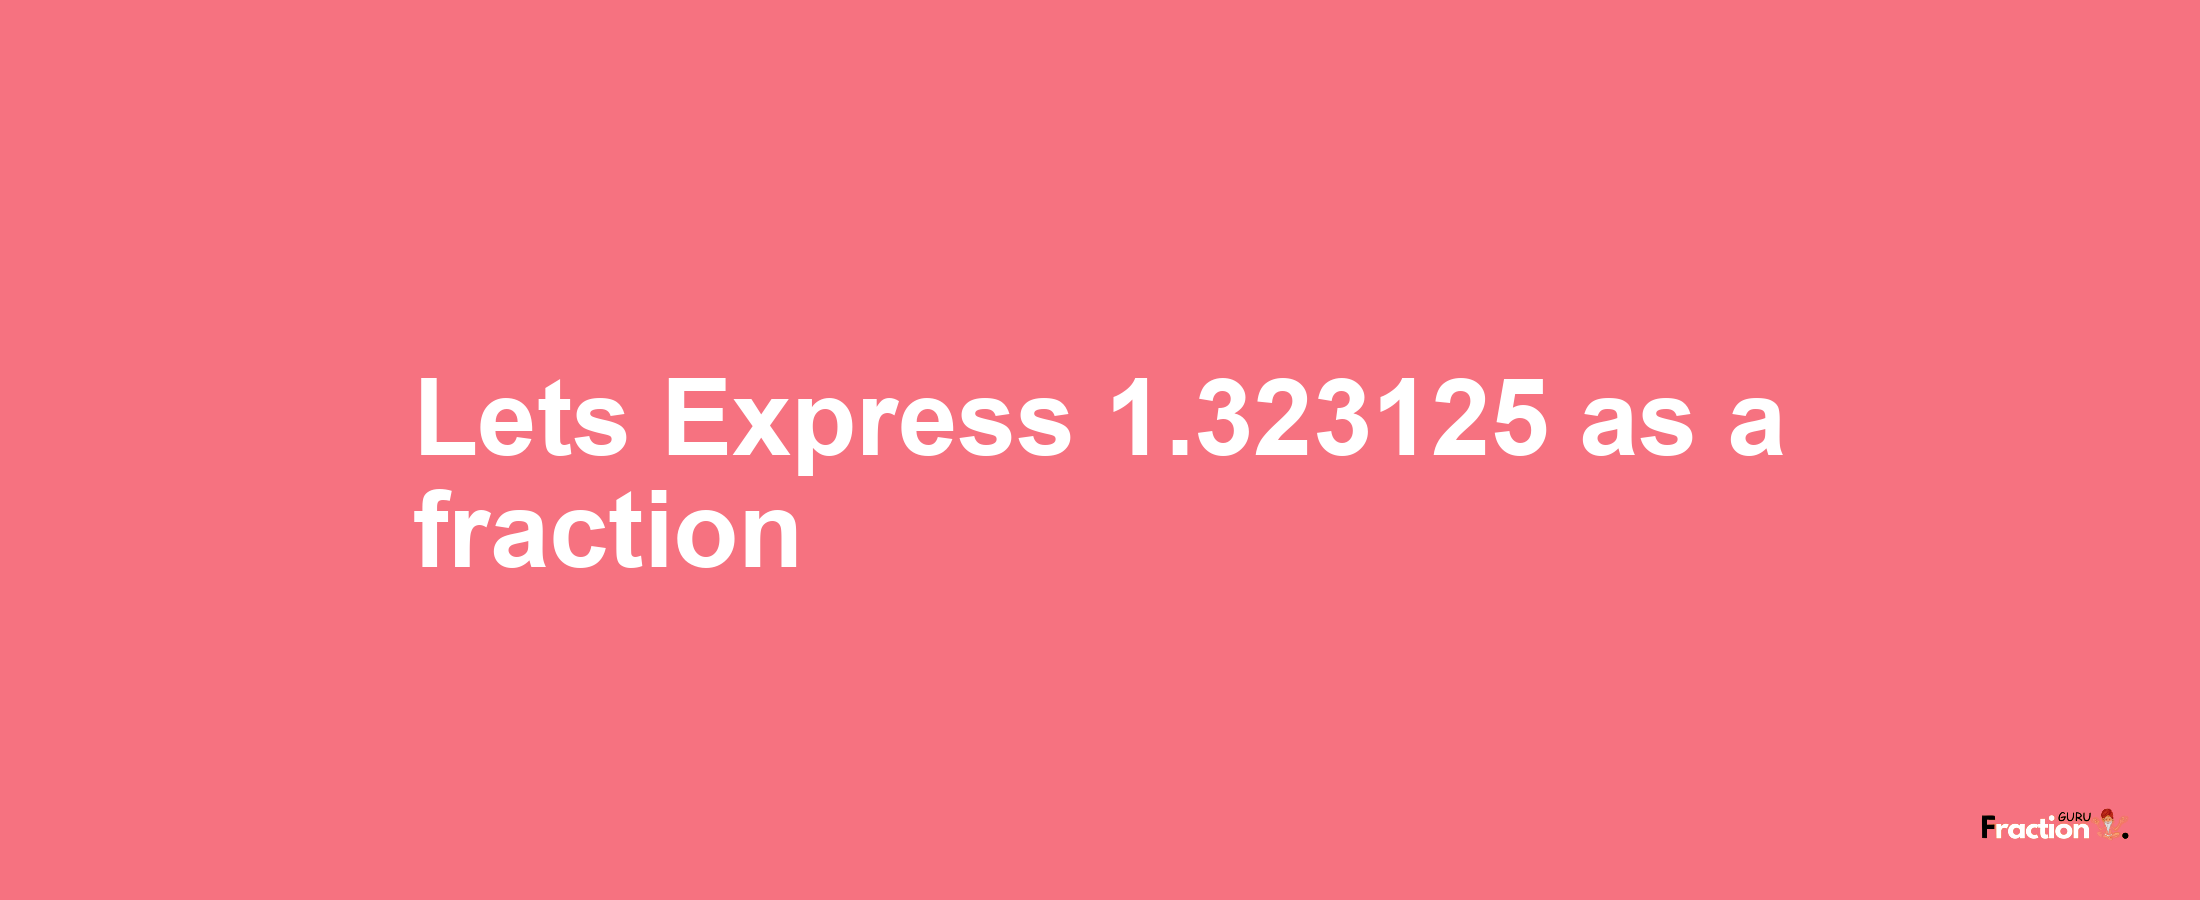 Lets Express 1.323125 as afraction